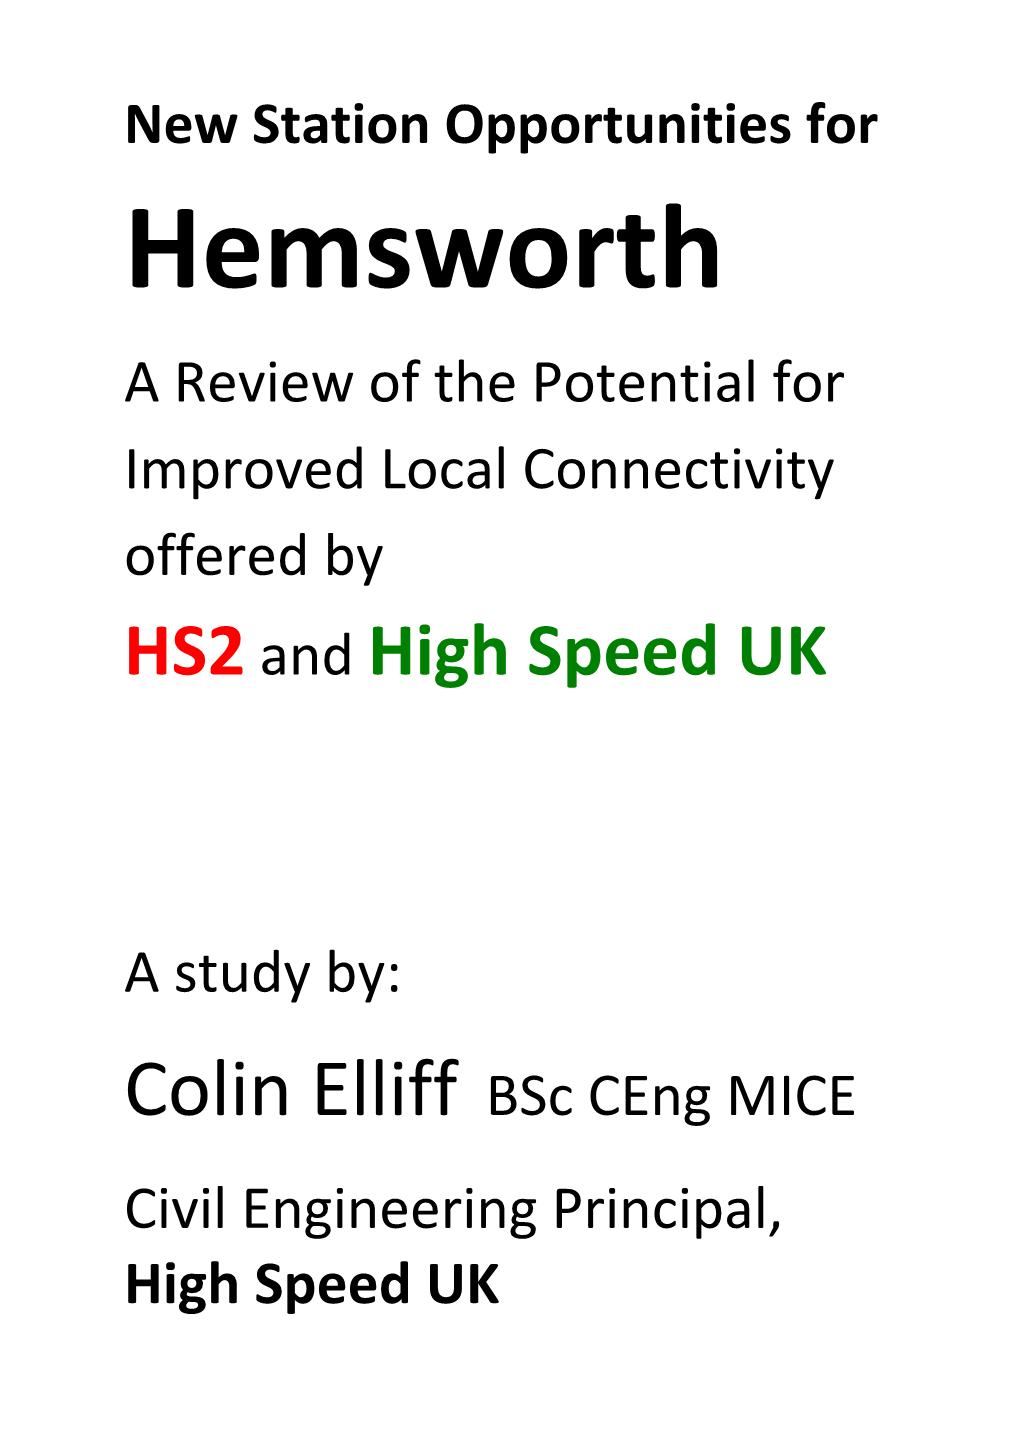 Hemsworth a Review of the Potential for Improved Local Connectivity Offered by HS2 and High Speed UK